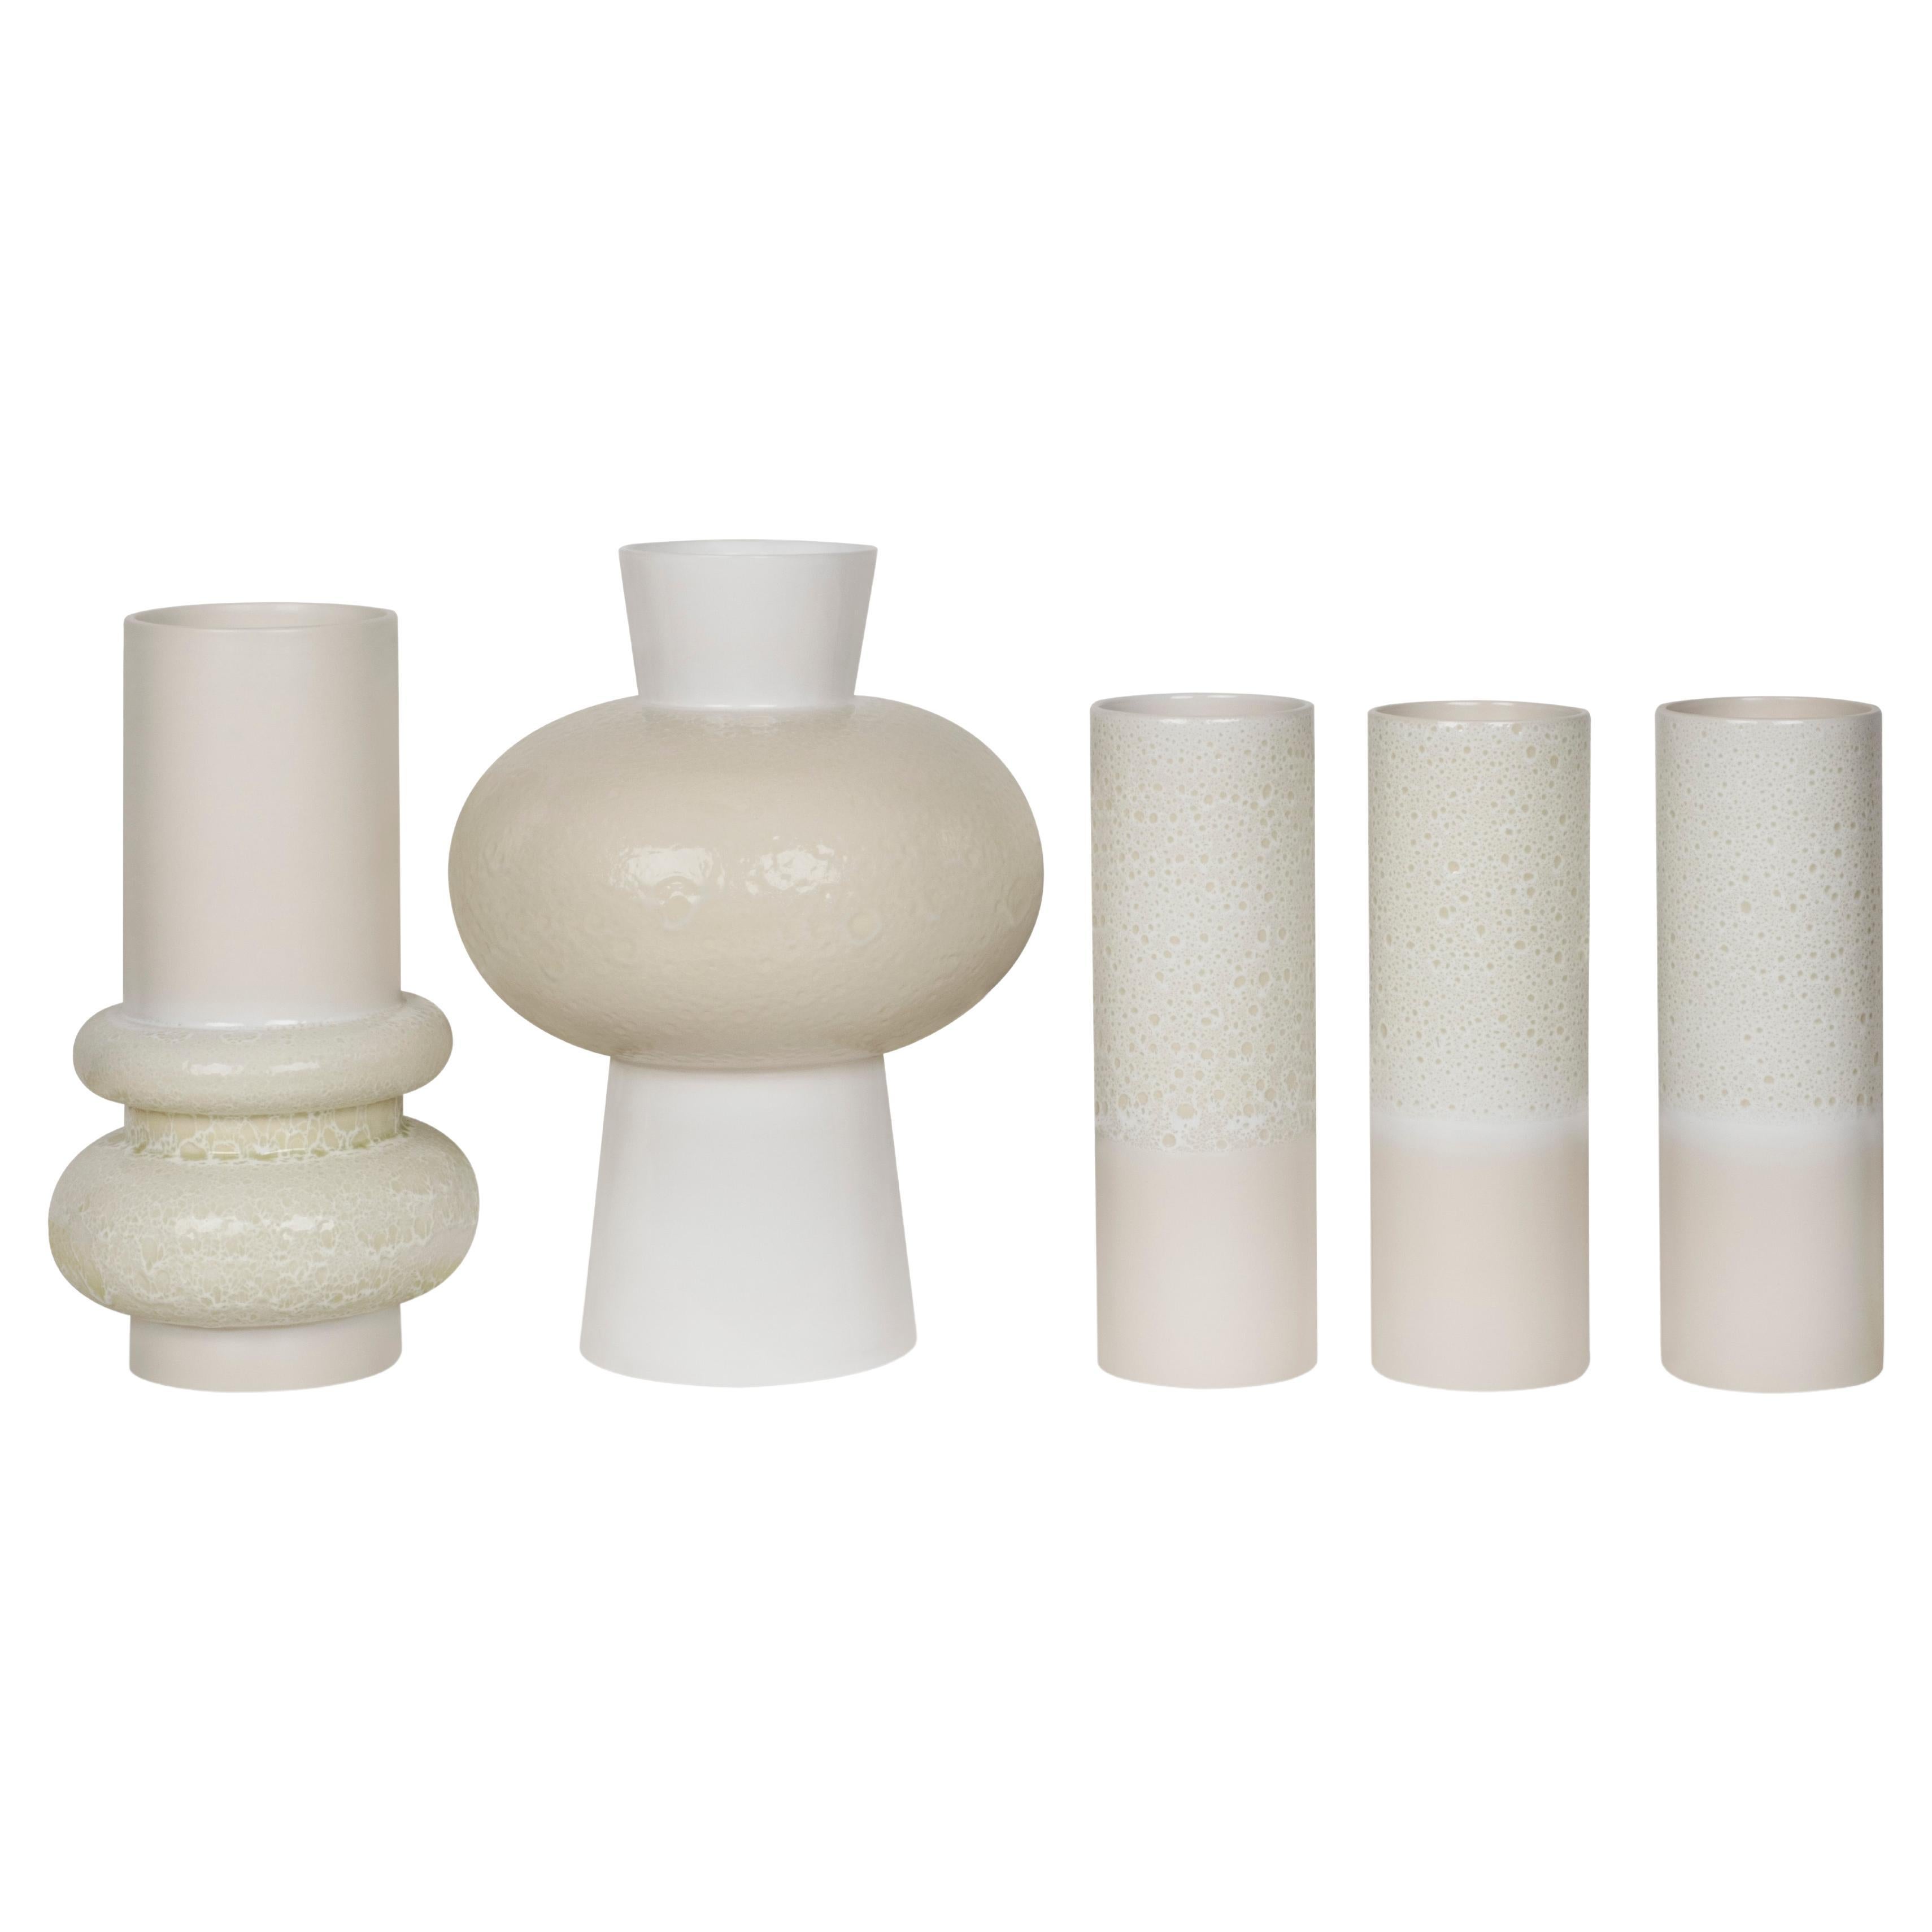 21st Century Modern Set of 5 Vases Handcrafted in Portugal by Greenapple